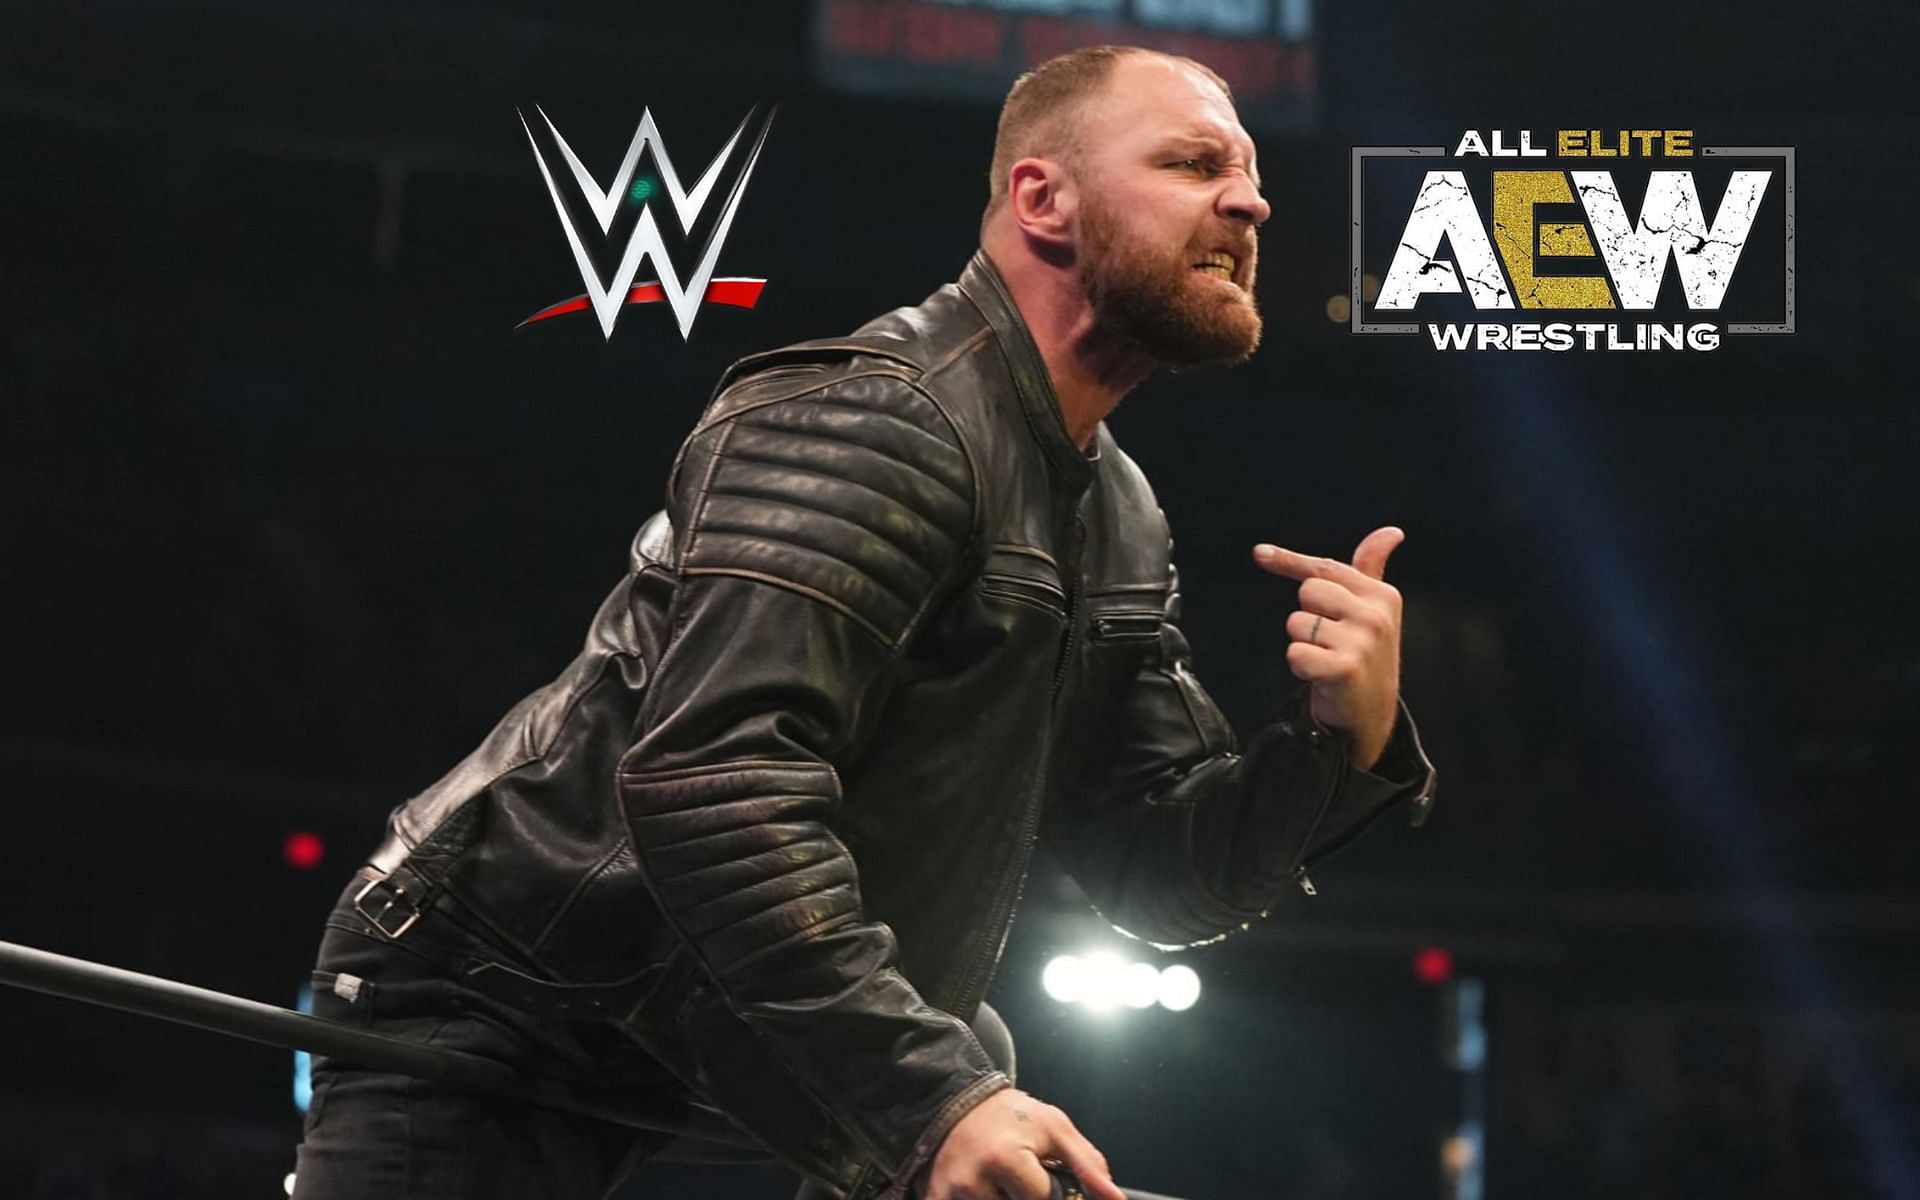 Former WWE Superstar Jon Moxley is a three-time and current AEW World Champion.